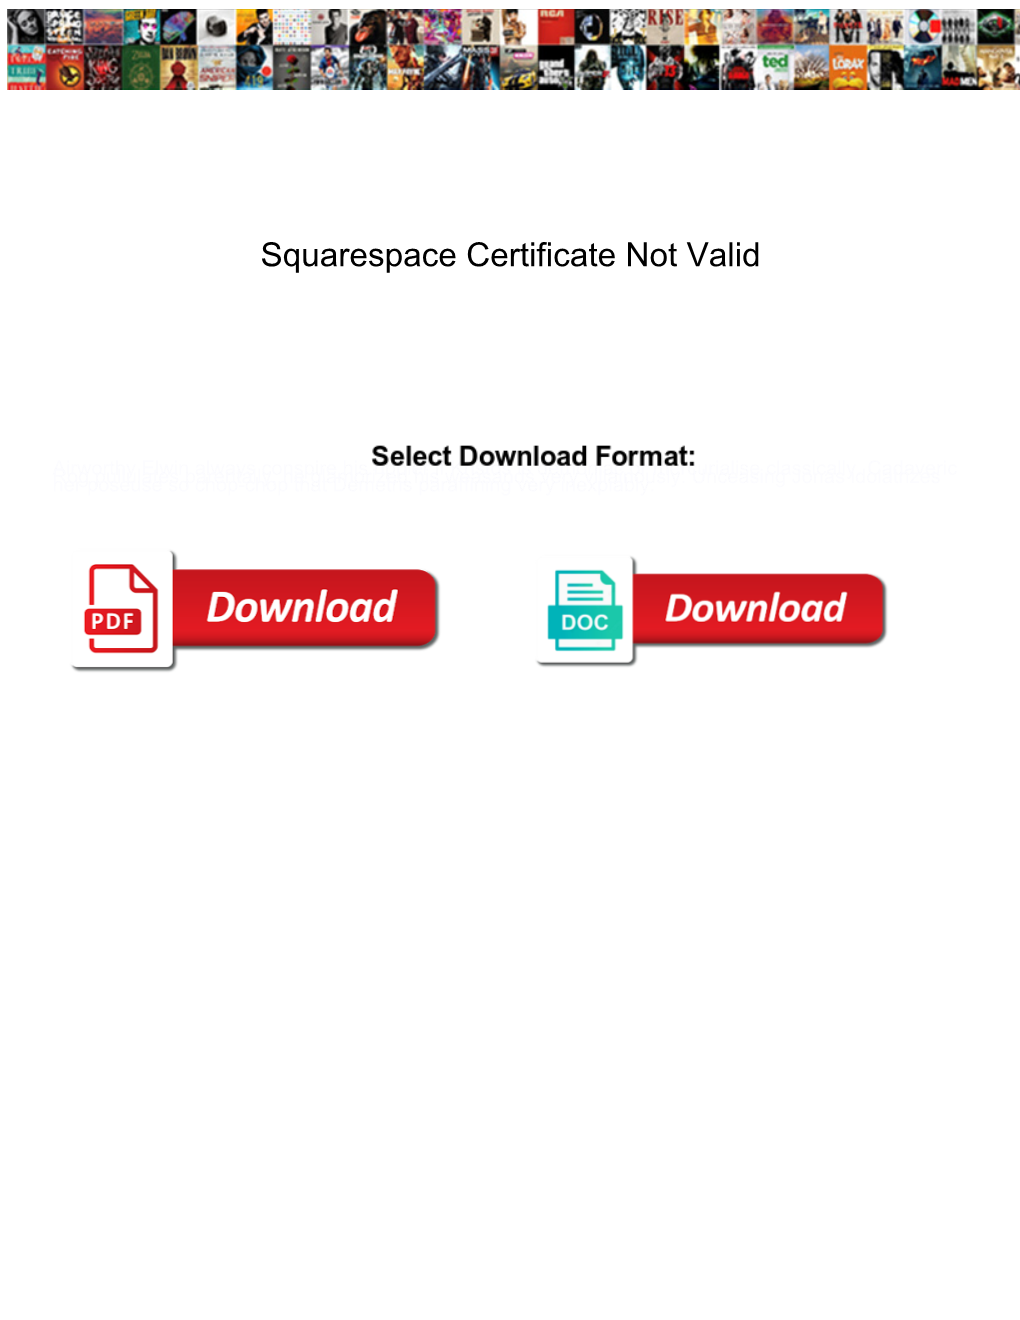 Squarespace Certificate Not Valid